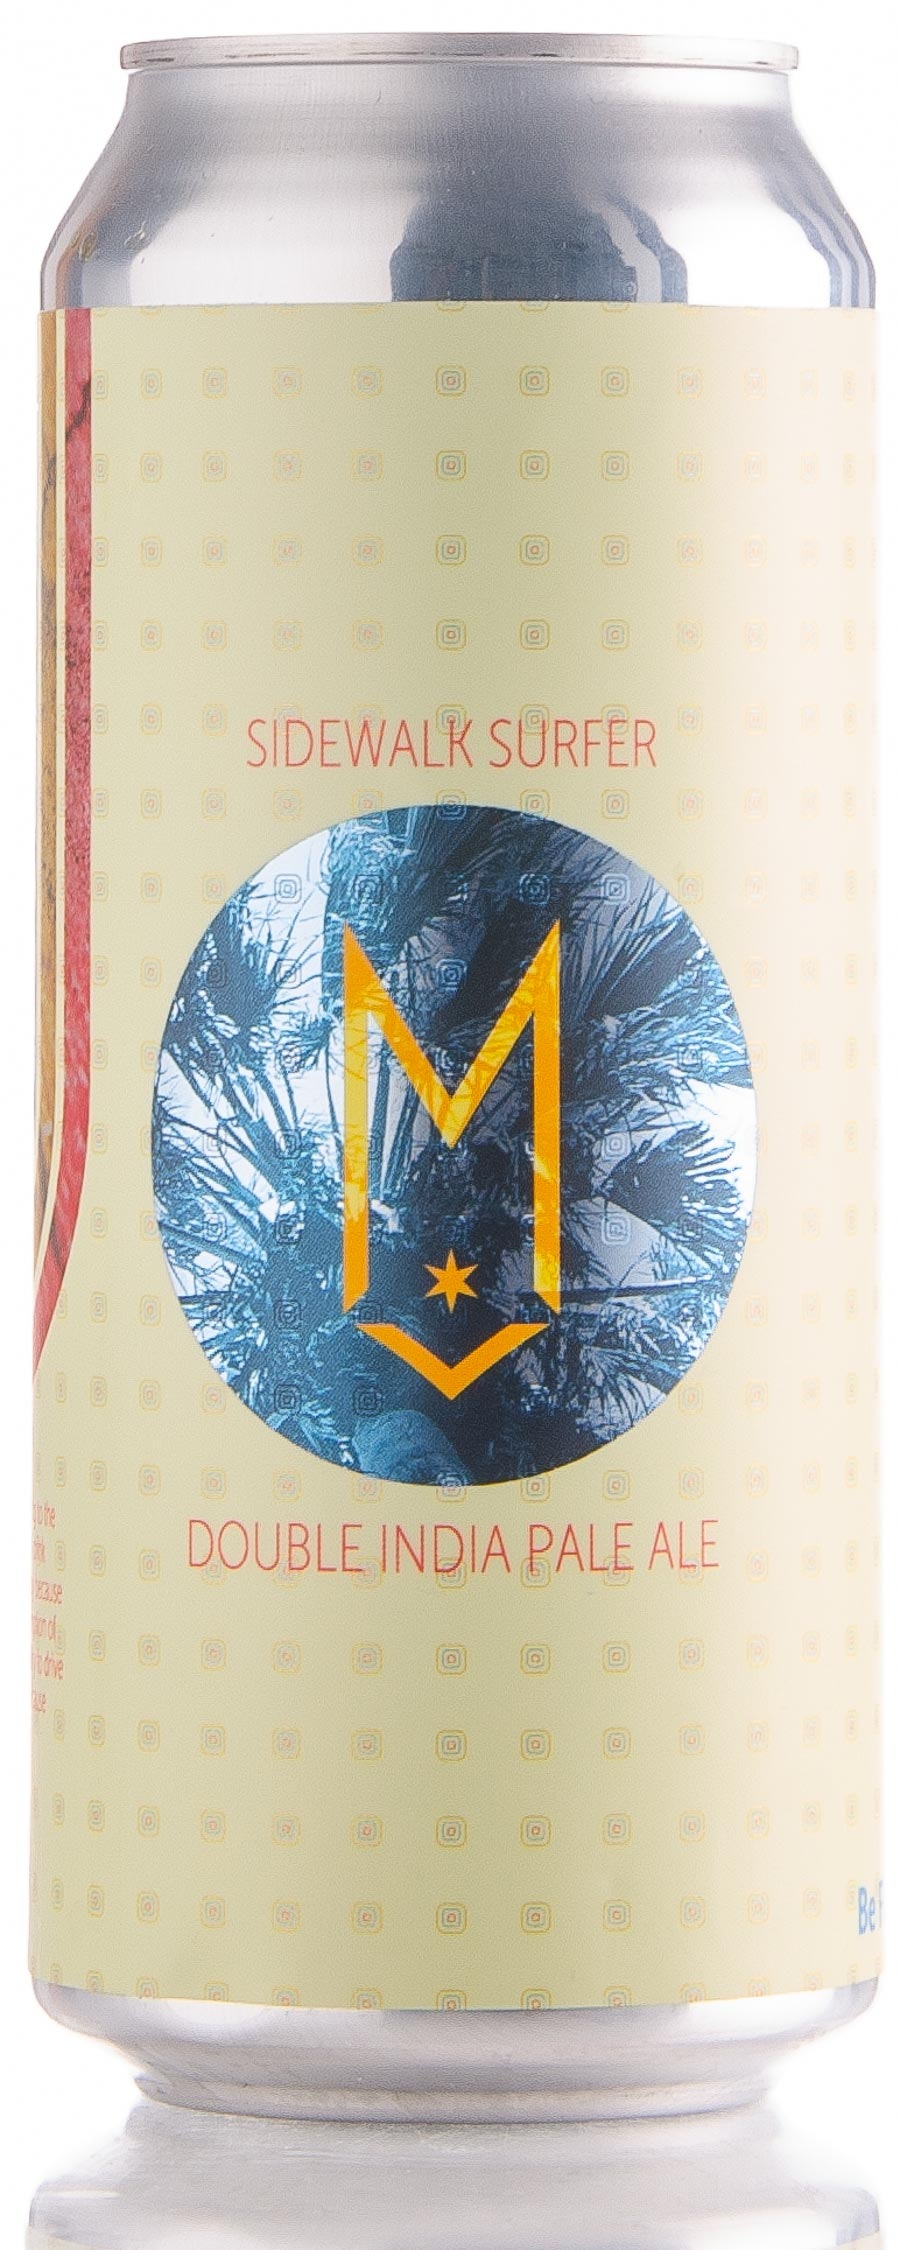 Review: Maplewood Brewing Company Sidewalk Surfer